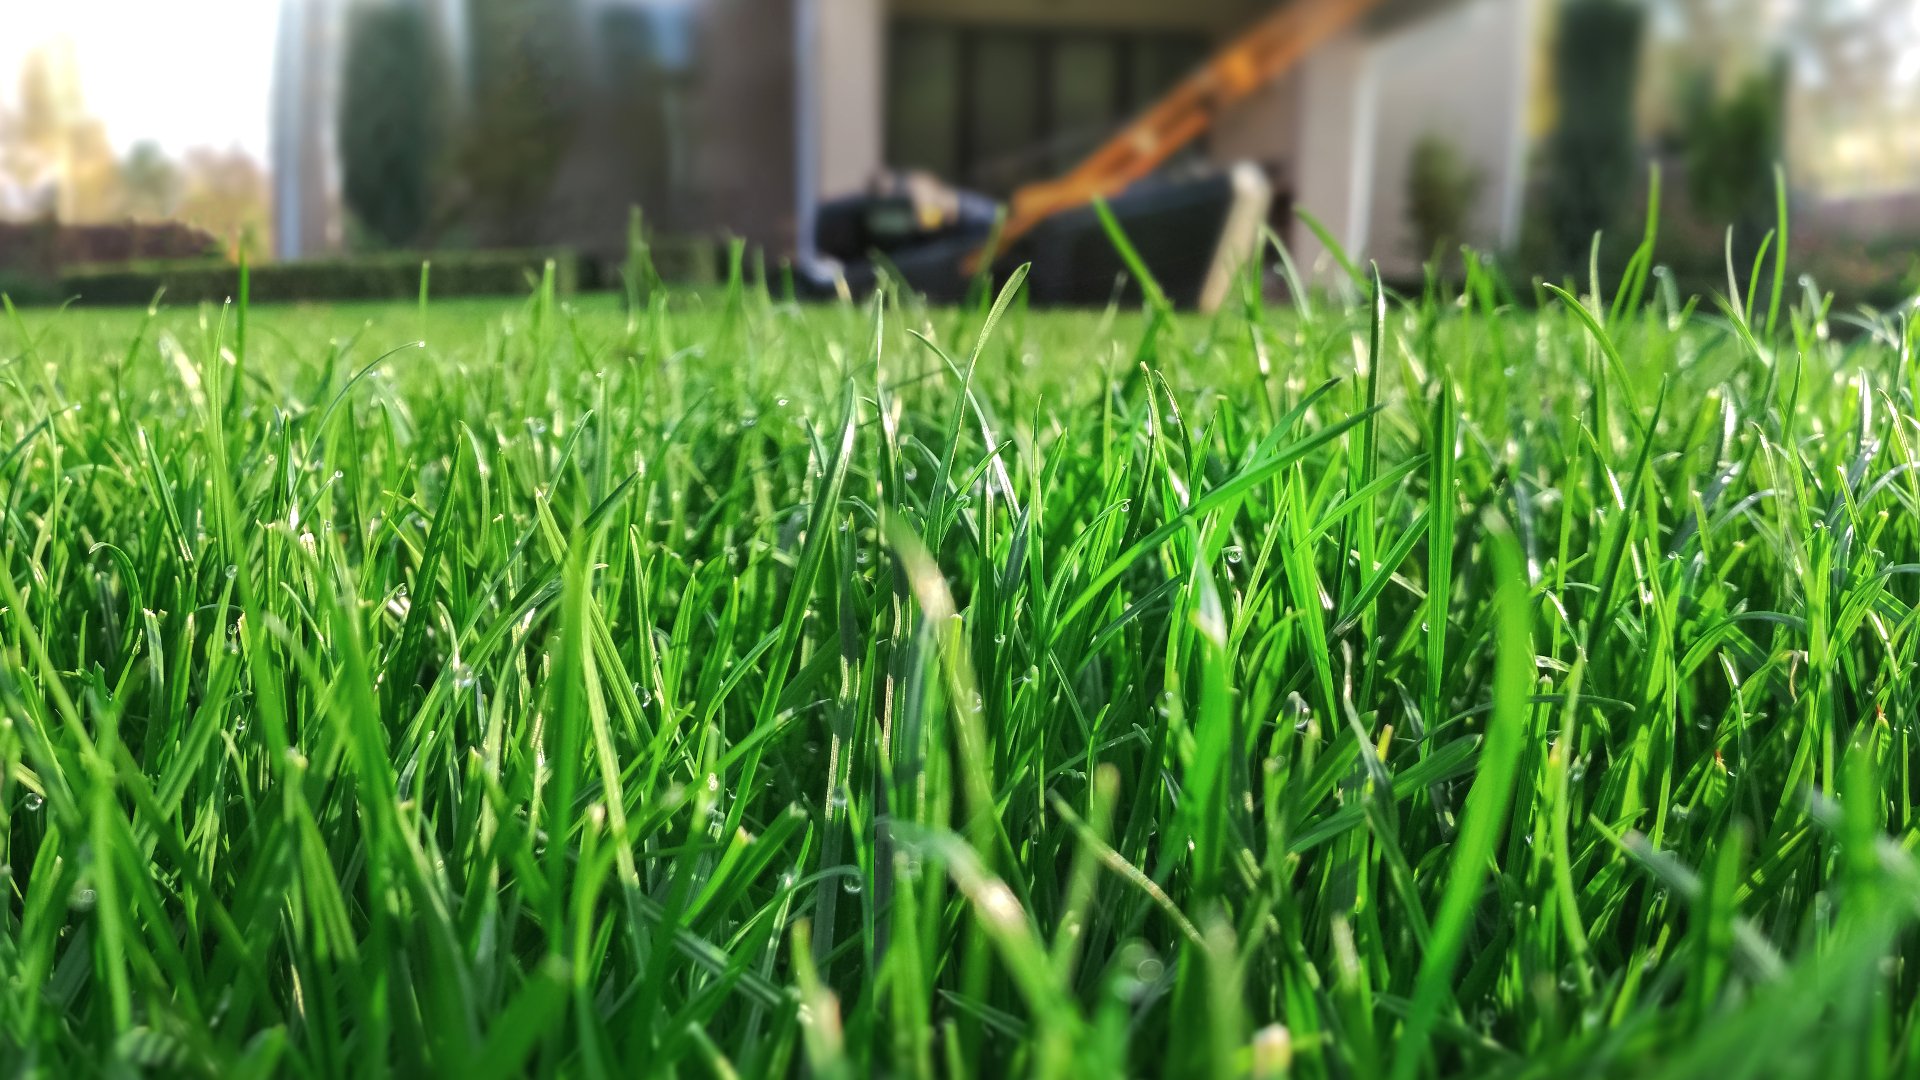 A Healthy Lawn in the Spring Means Aerating & Overseeding in the Fall